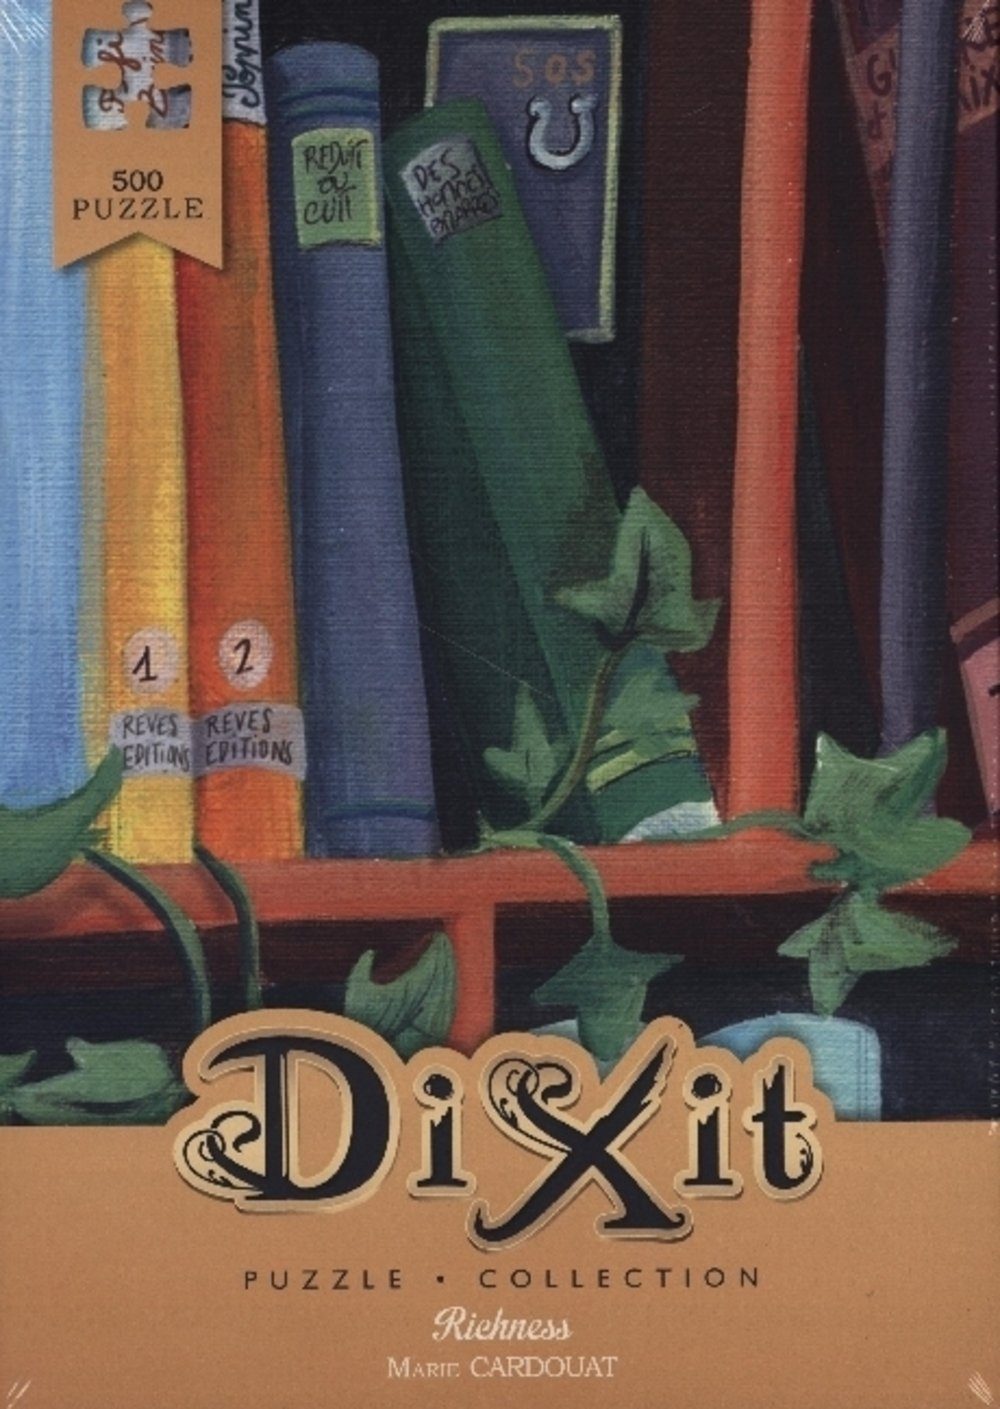 Asmodee Puzzle Richness, Puzzle-Collection Dixit Puzzleteile 500